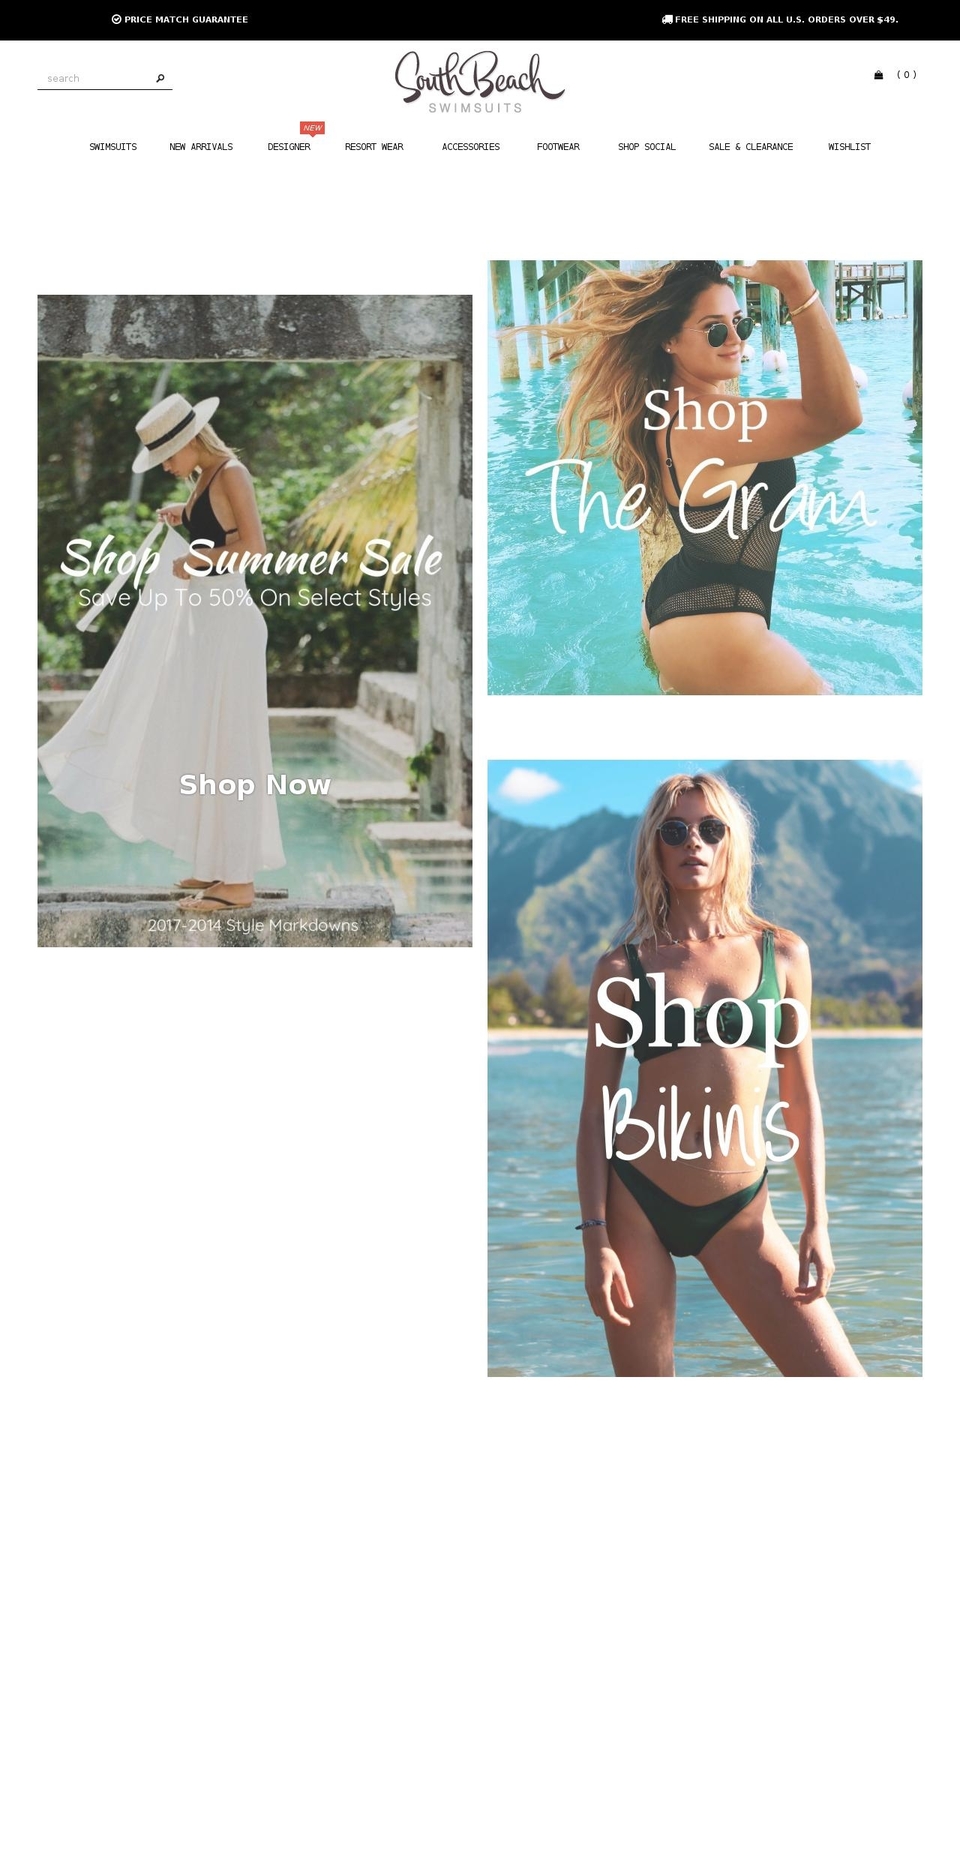 Made With ❤ By Minion Made - Updated Checkout Shopify theme site example southbeachcoverups.com